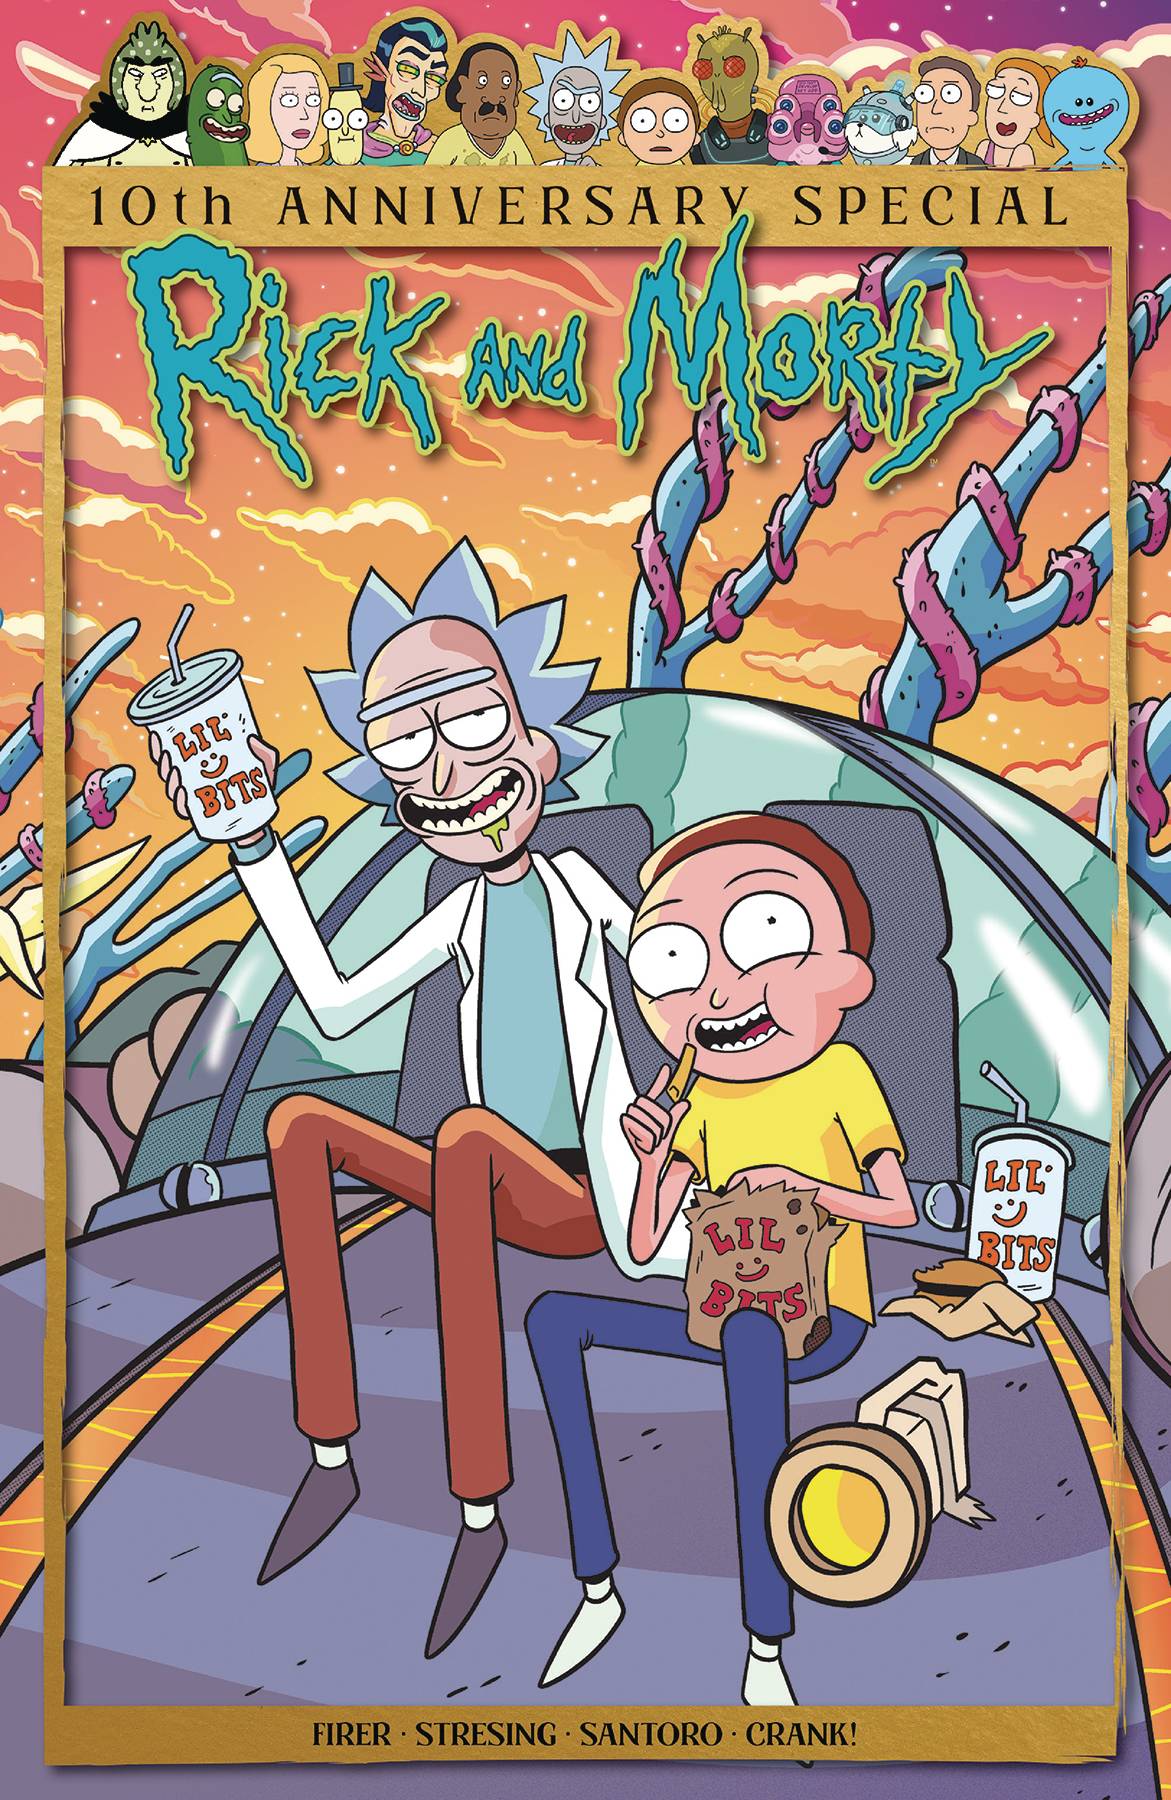 RICK AND MORTY 10TH ANNI SPECIAL